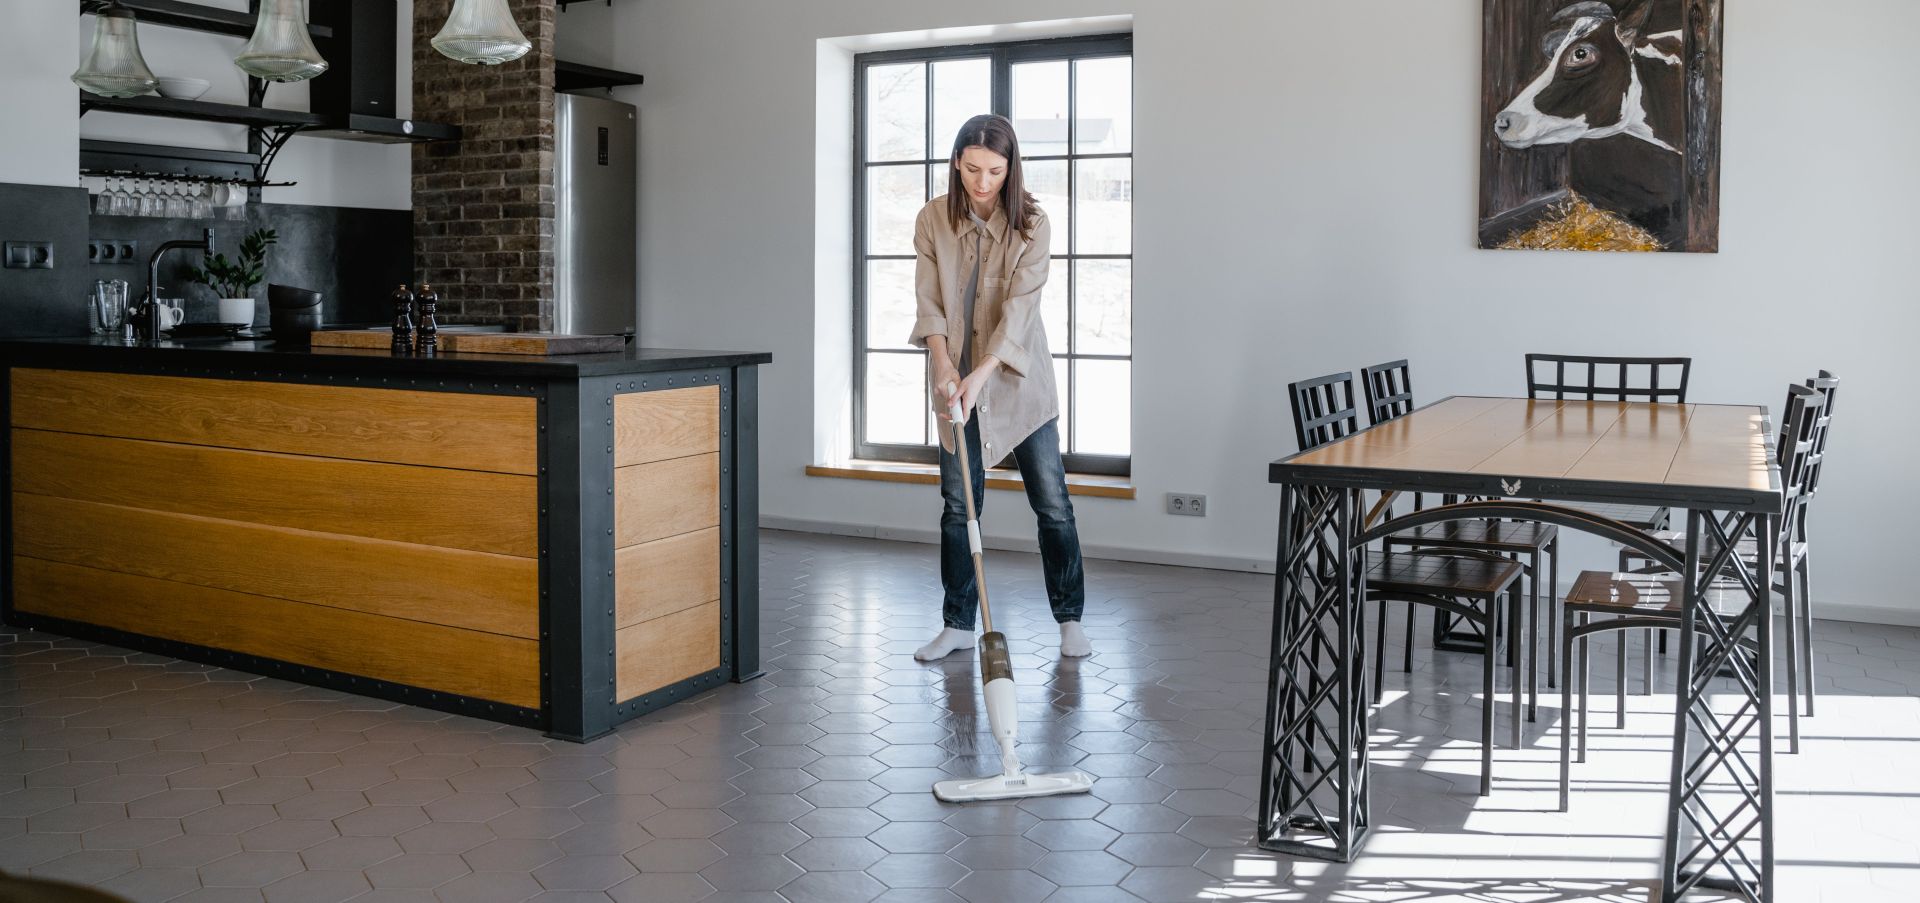 A Woman Mopping the Floor